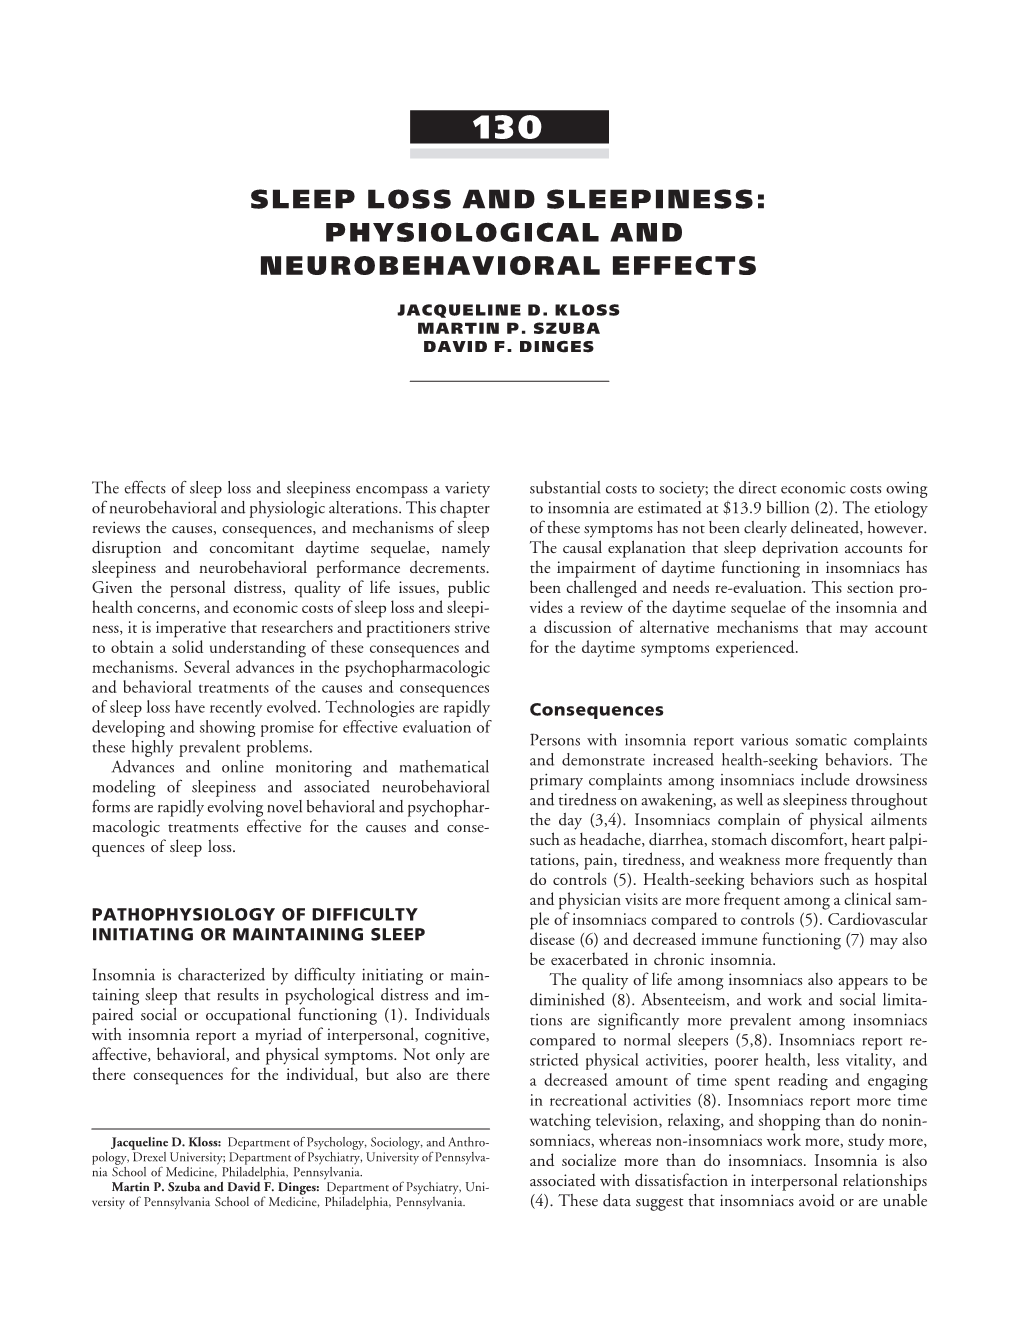 Sleep Loss and Sleepiness: Physiological and Neurobehavioral Effects